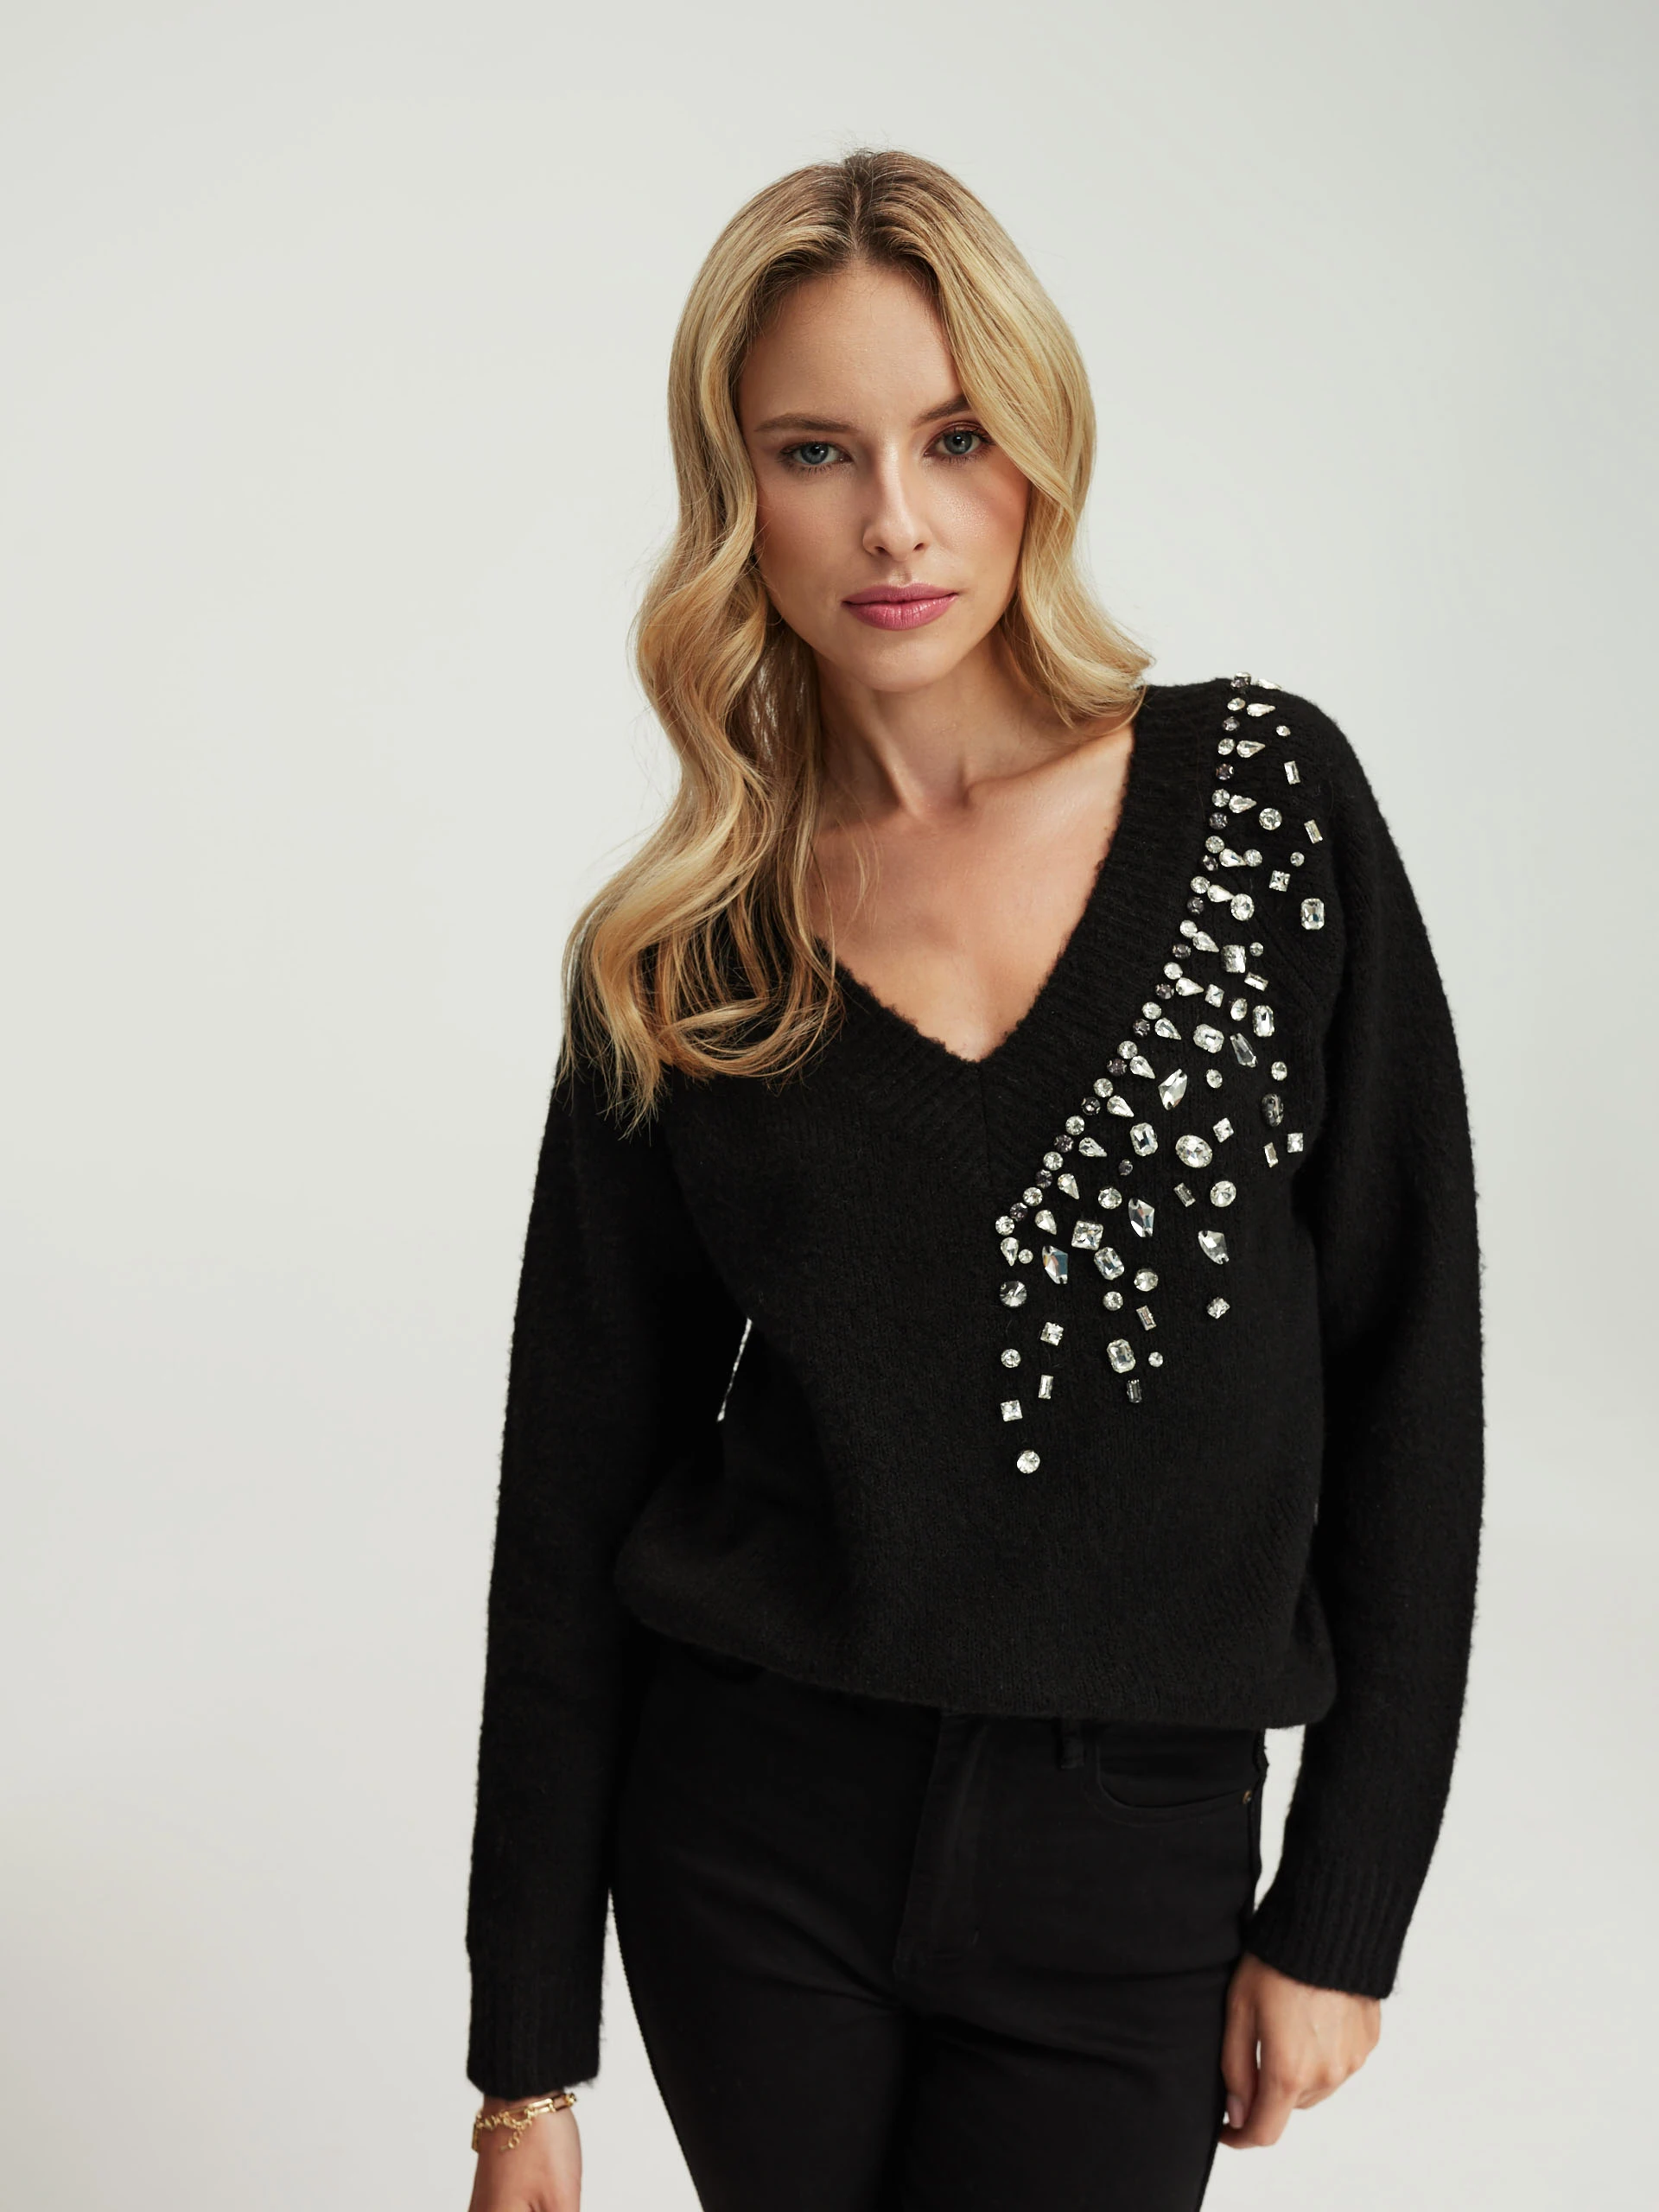 Black sweater with ornaments